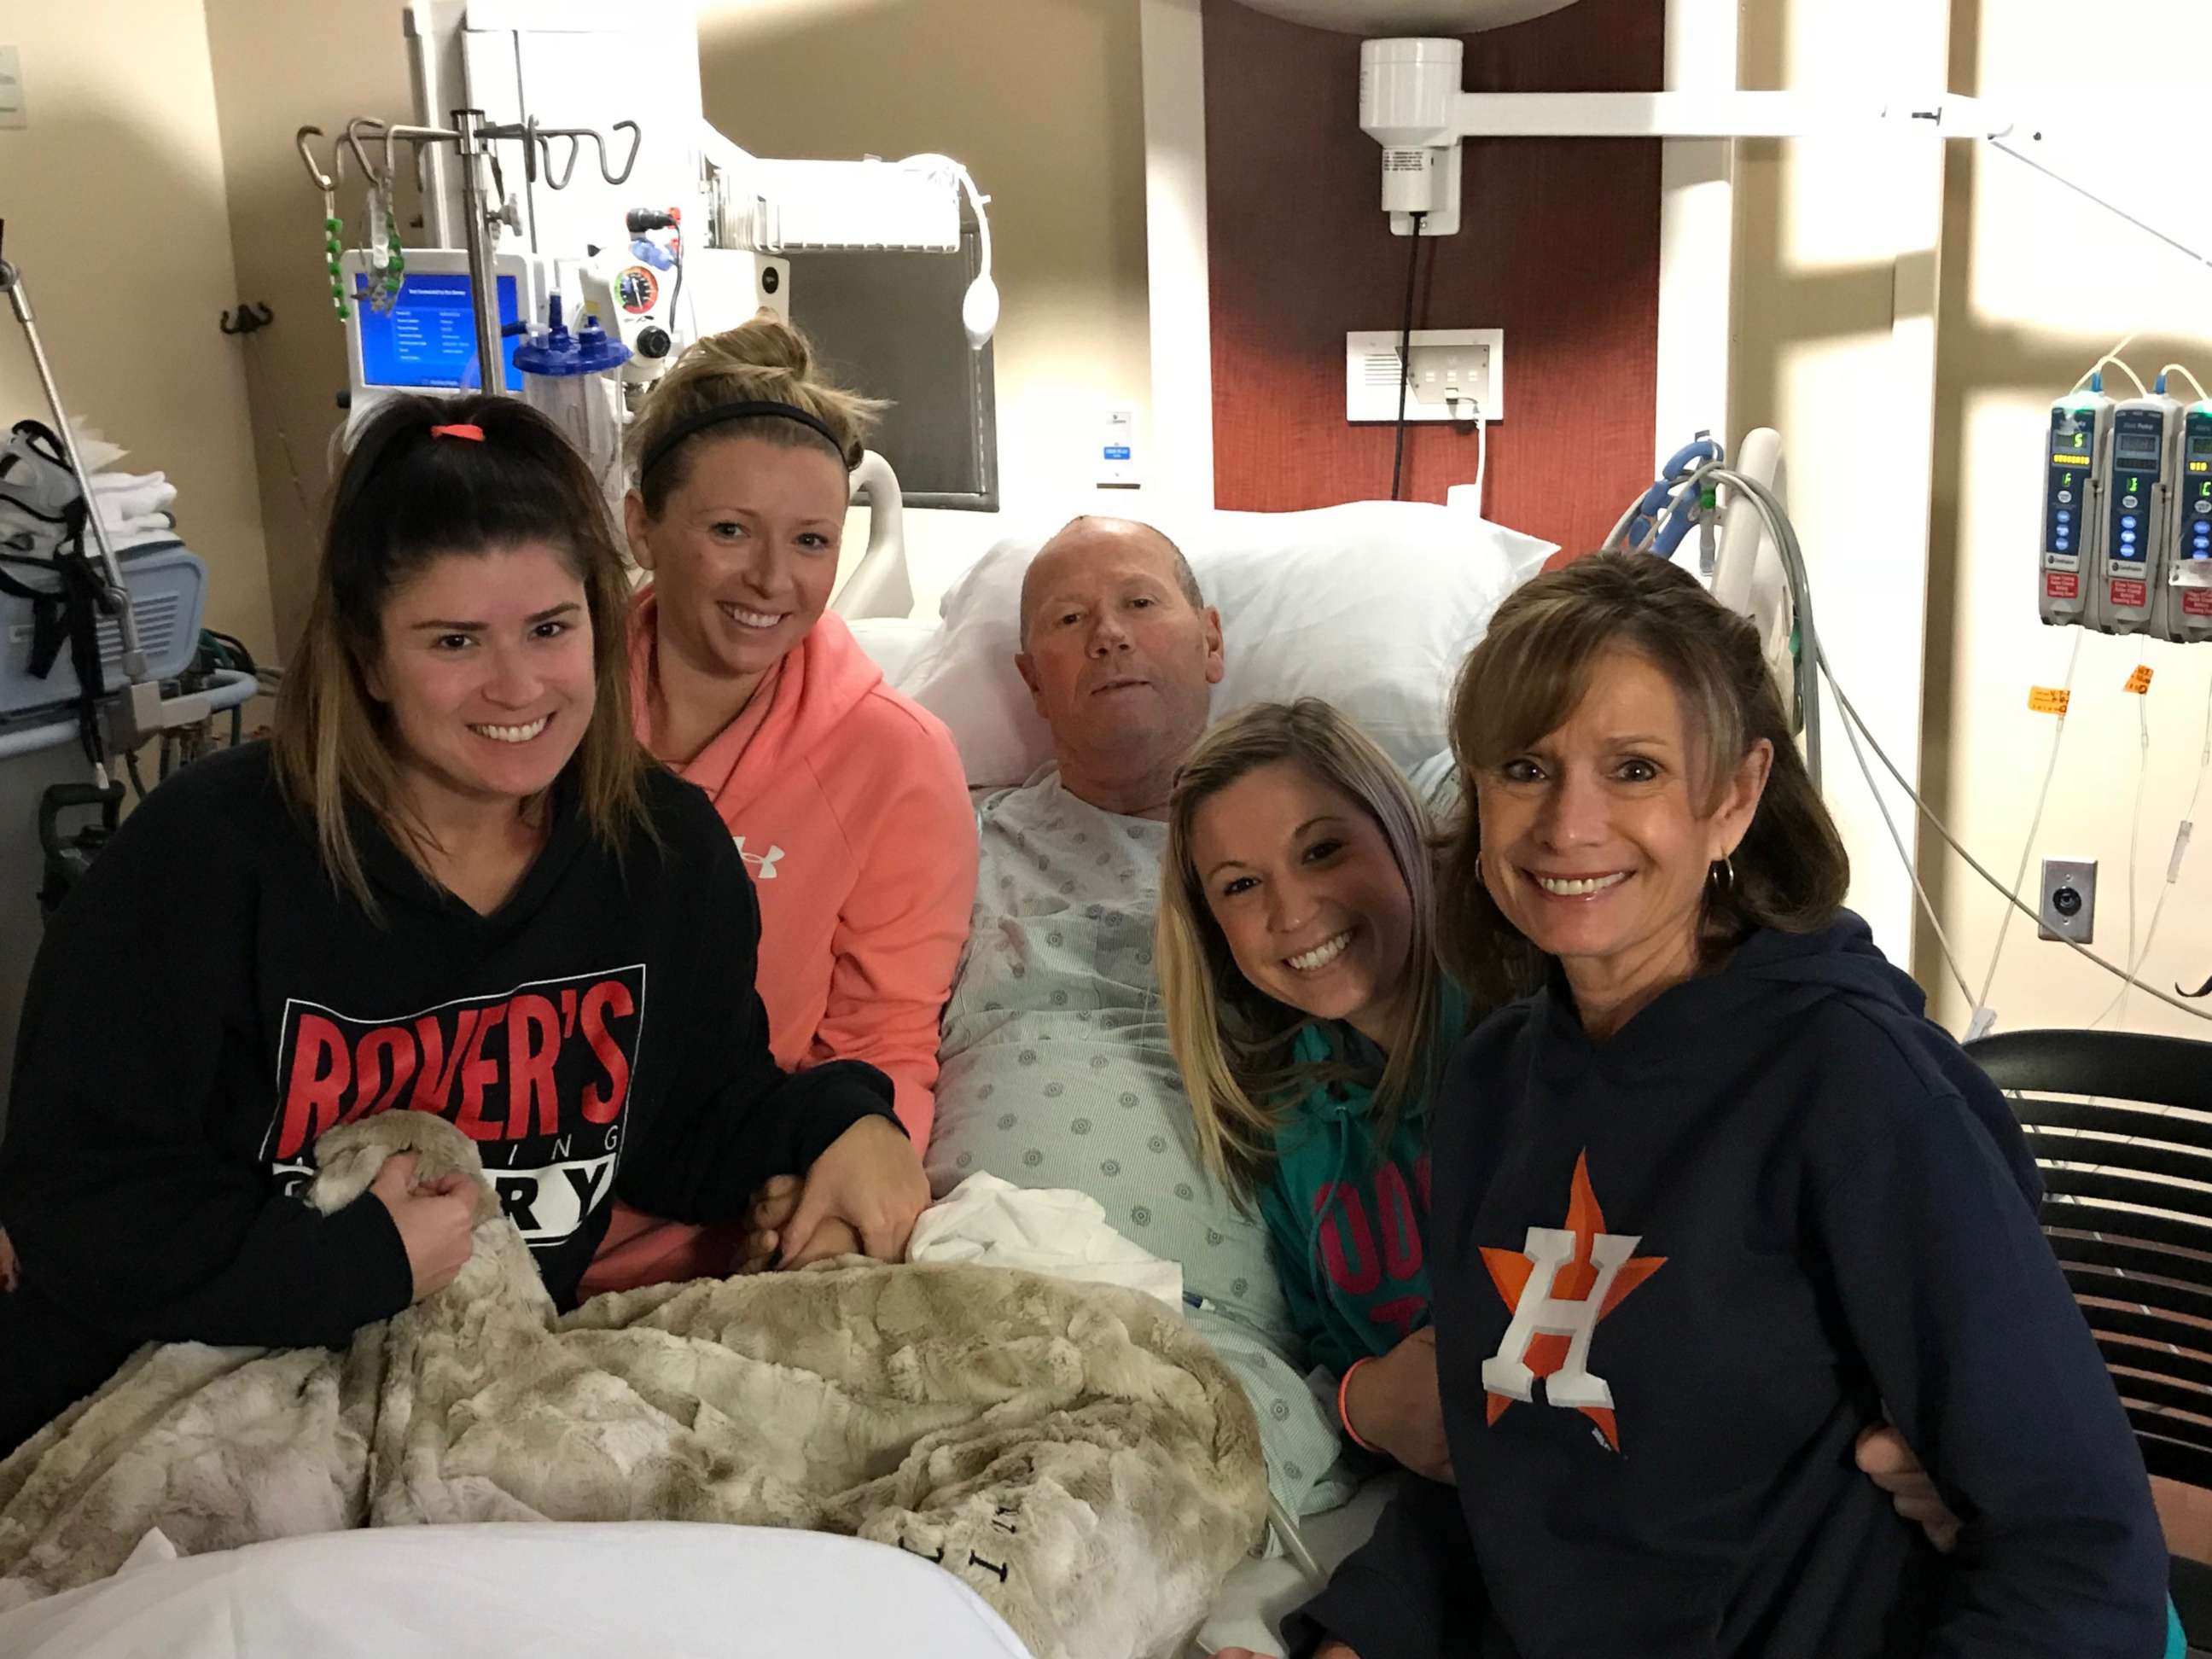 PHOTO: Rich Dauer and his family in the hospital while he was recovering from brain surgery.